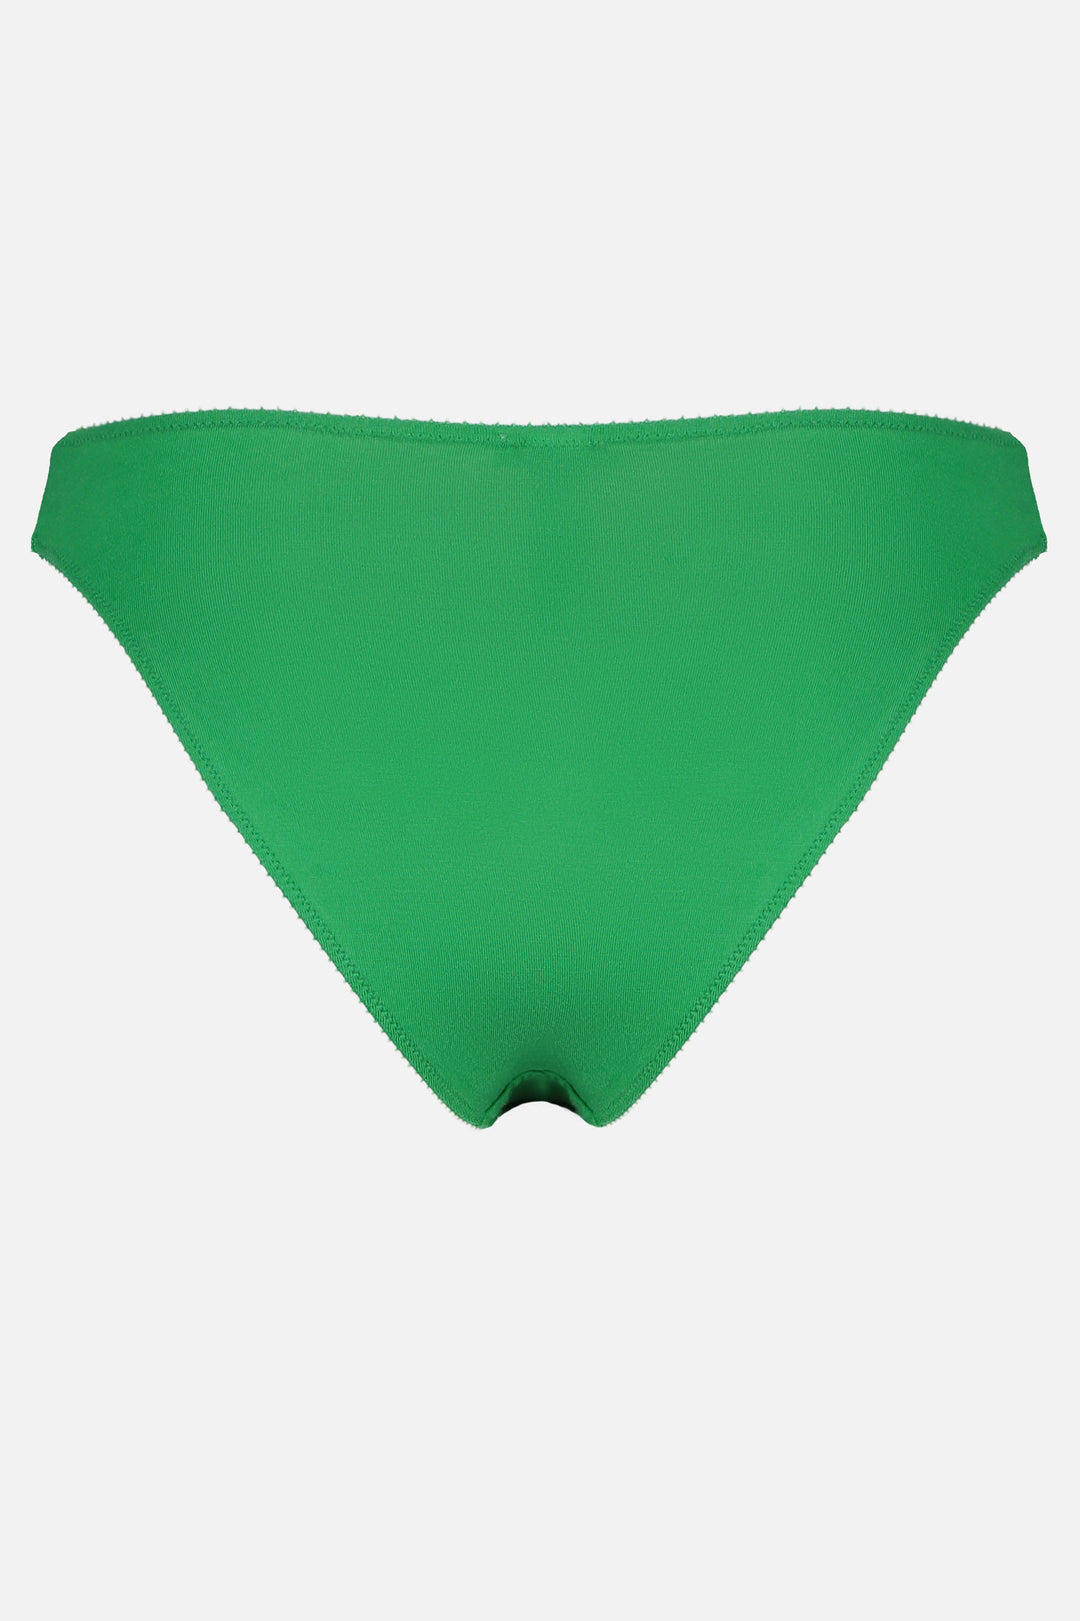 Videris Lingerie bikini knicker in poise green TENCEL™  mid-rise style with cheeky bottom coverage and soft elastics